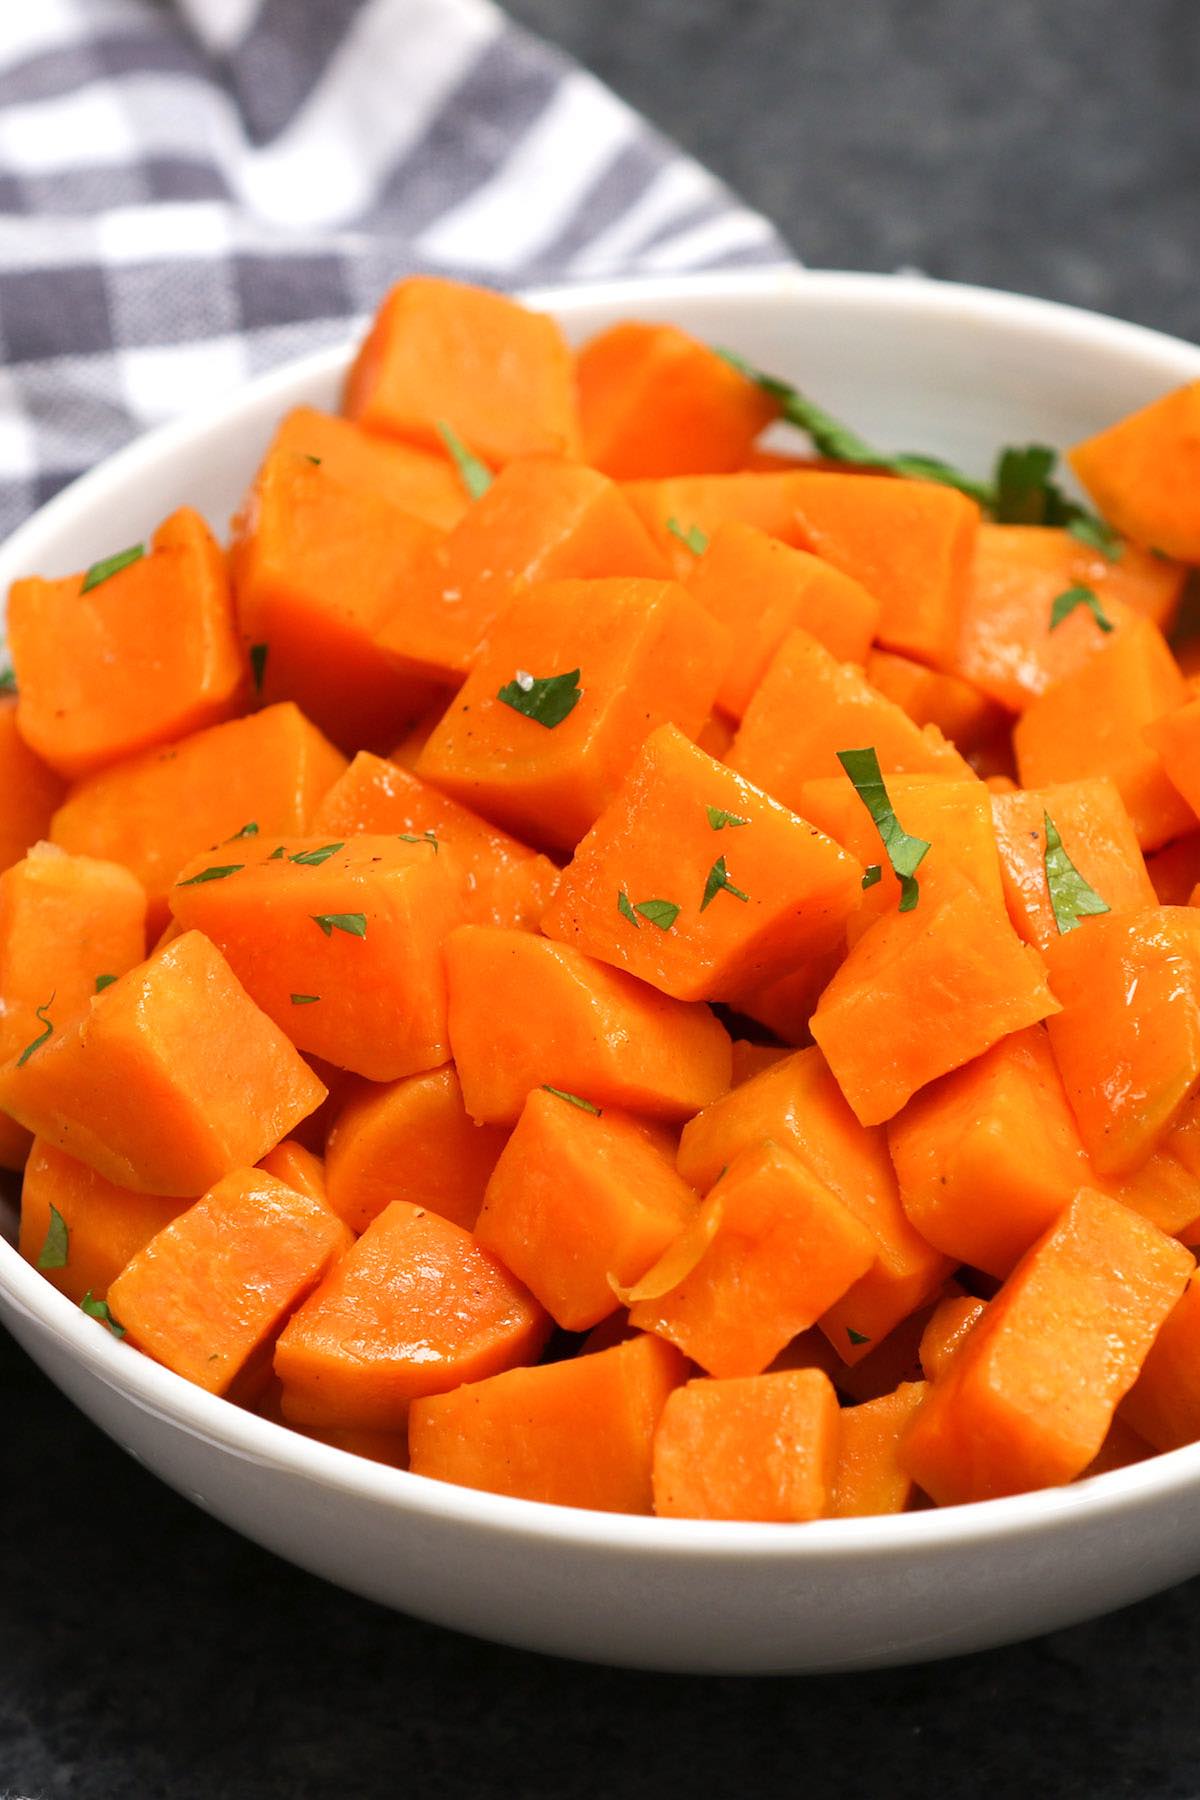 Known for its delicious flavor and health benefits, the sweet potato is an incredibly versatile vegetable. It can be enjoyed in a variety of dishes, from savory stews, to oven-baked wedges, and even desserts! If you have sweet potatoes on hand and you know you won’t get a chance to use them before they spoil, your best bet is to freeze them.